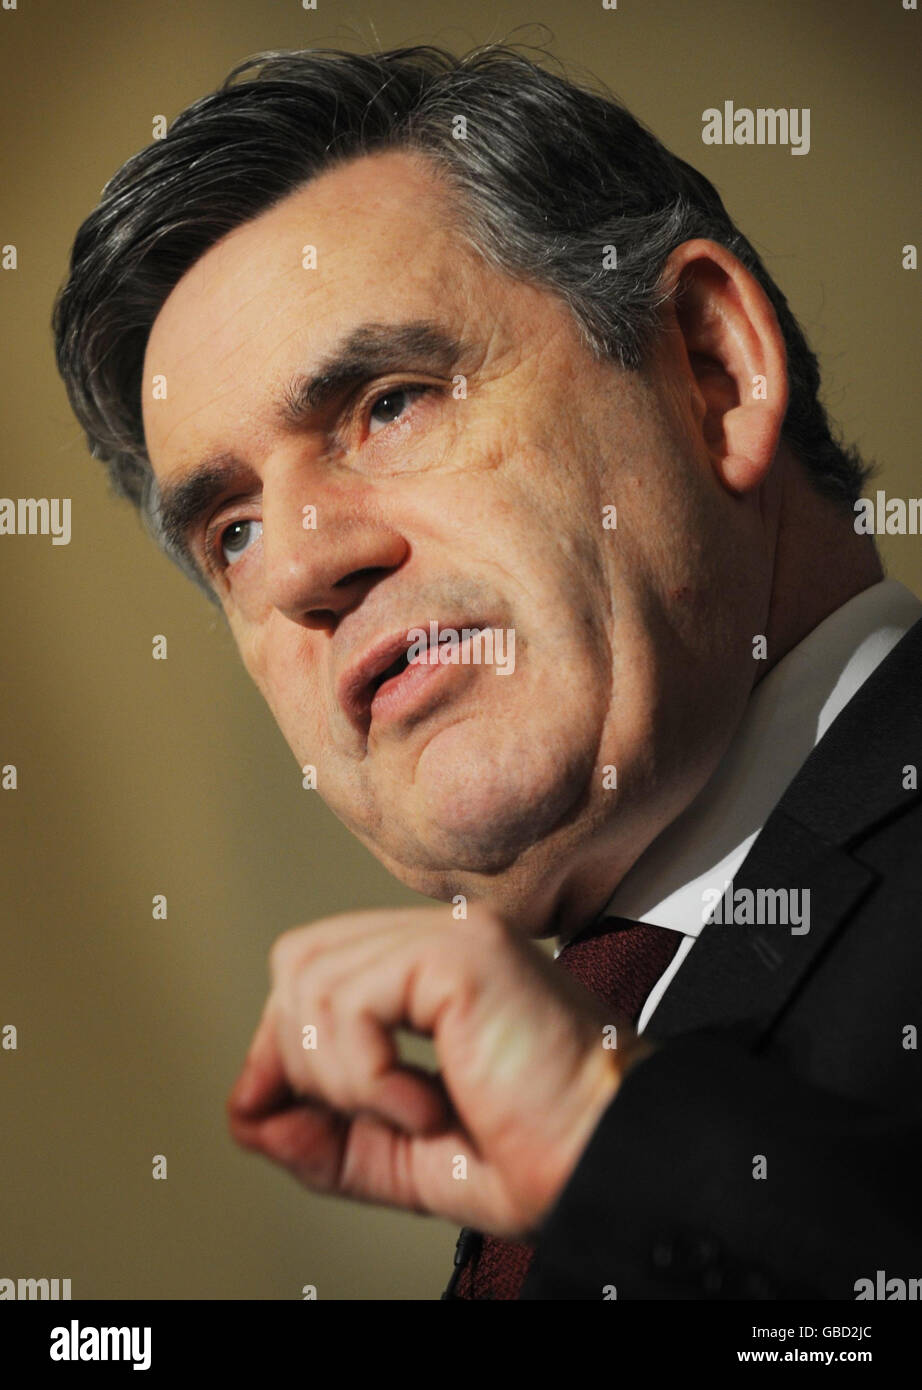 Prime Minister Gordon Brown during his speech on Britain and the Global economy at the Foreign Press Association in London. Stock Photo